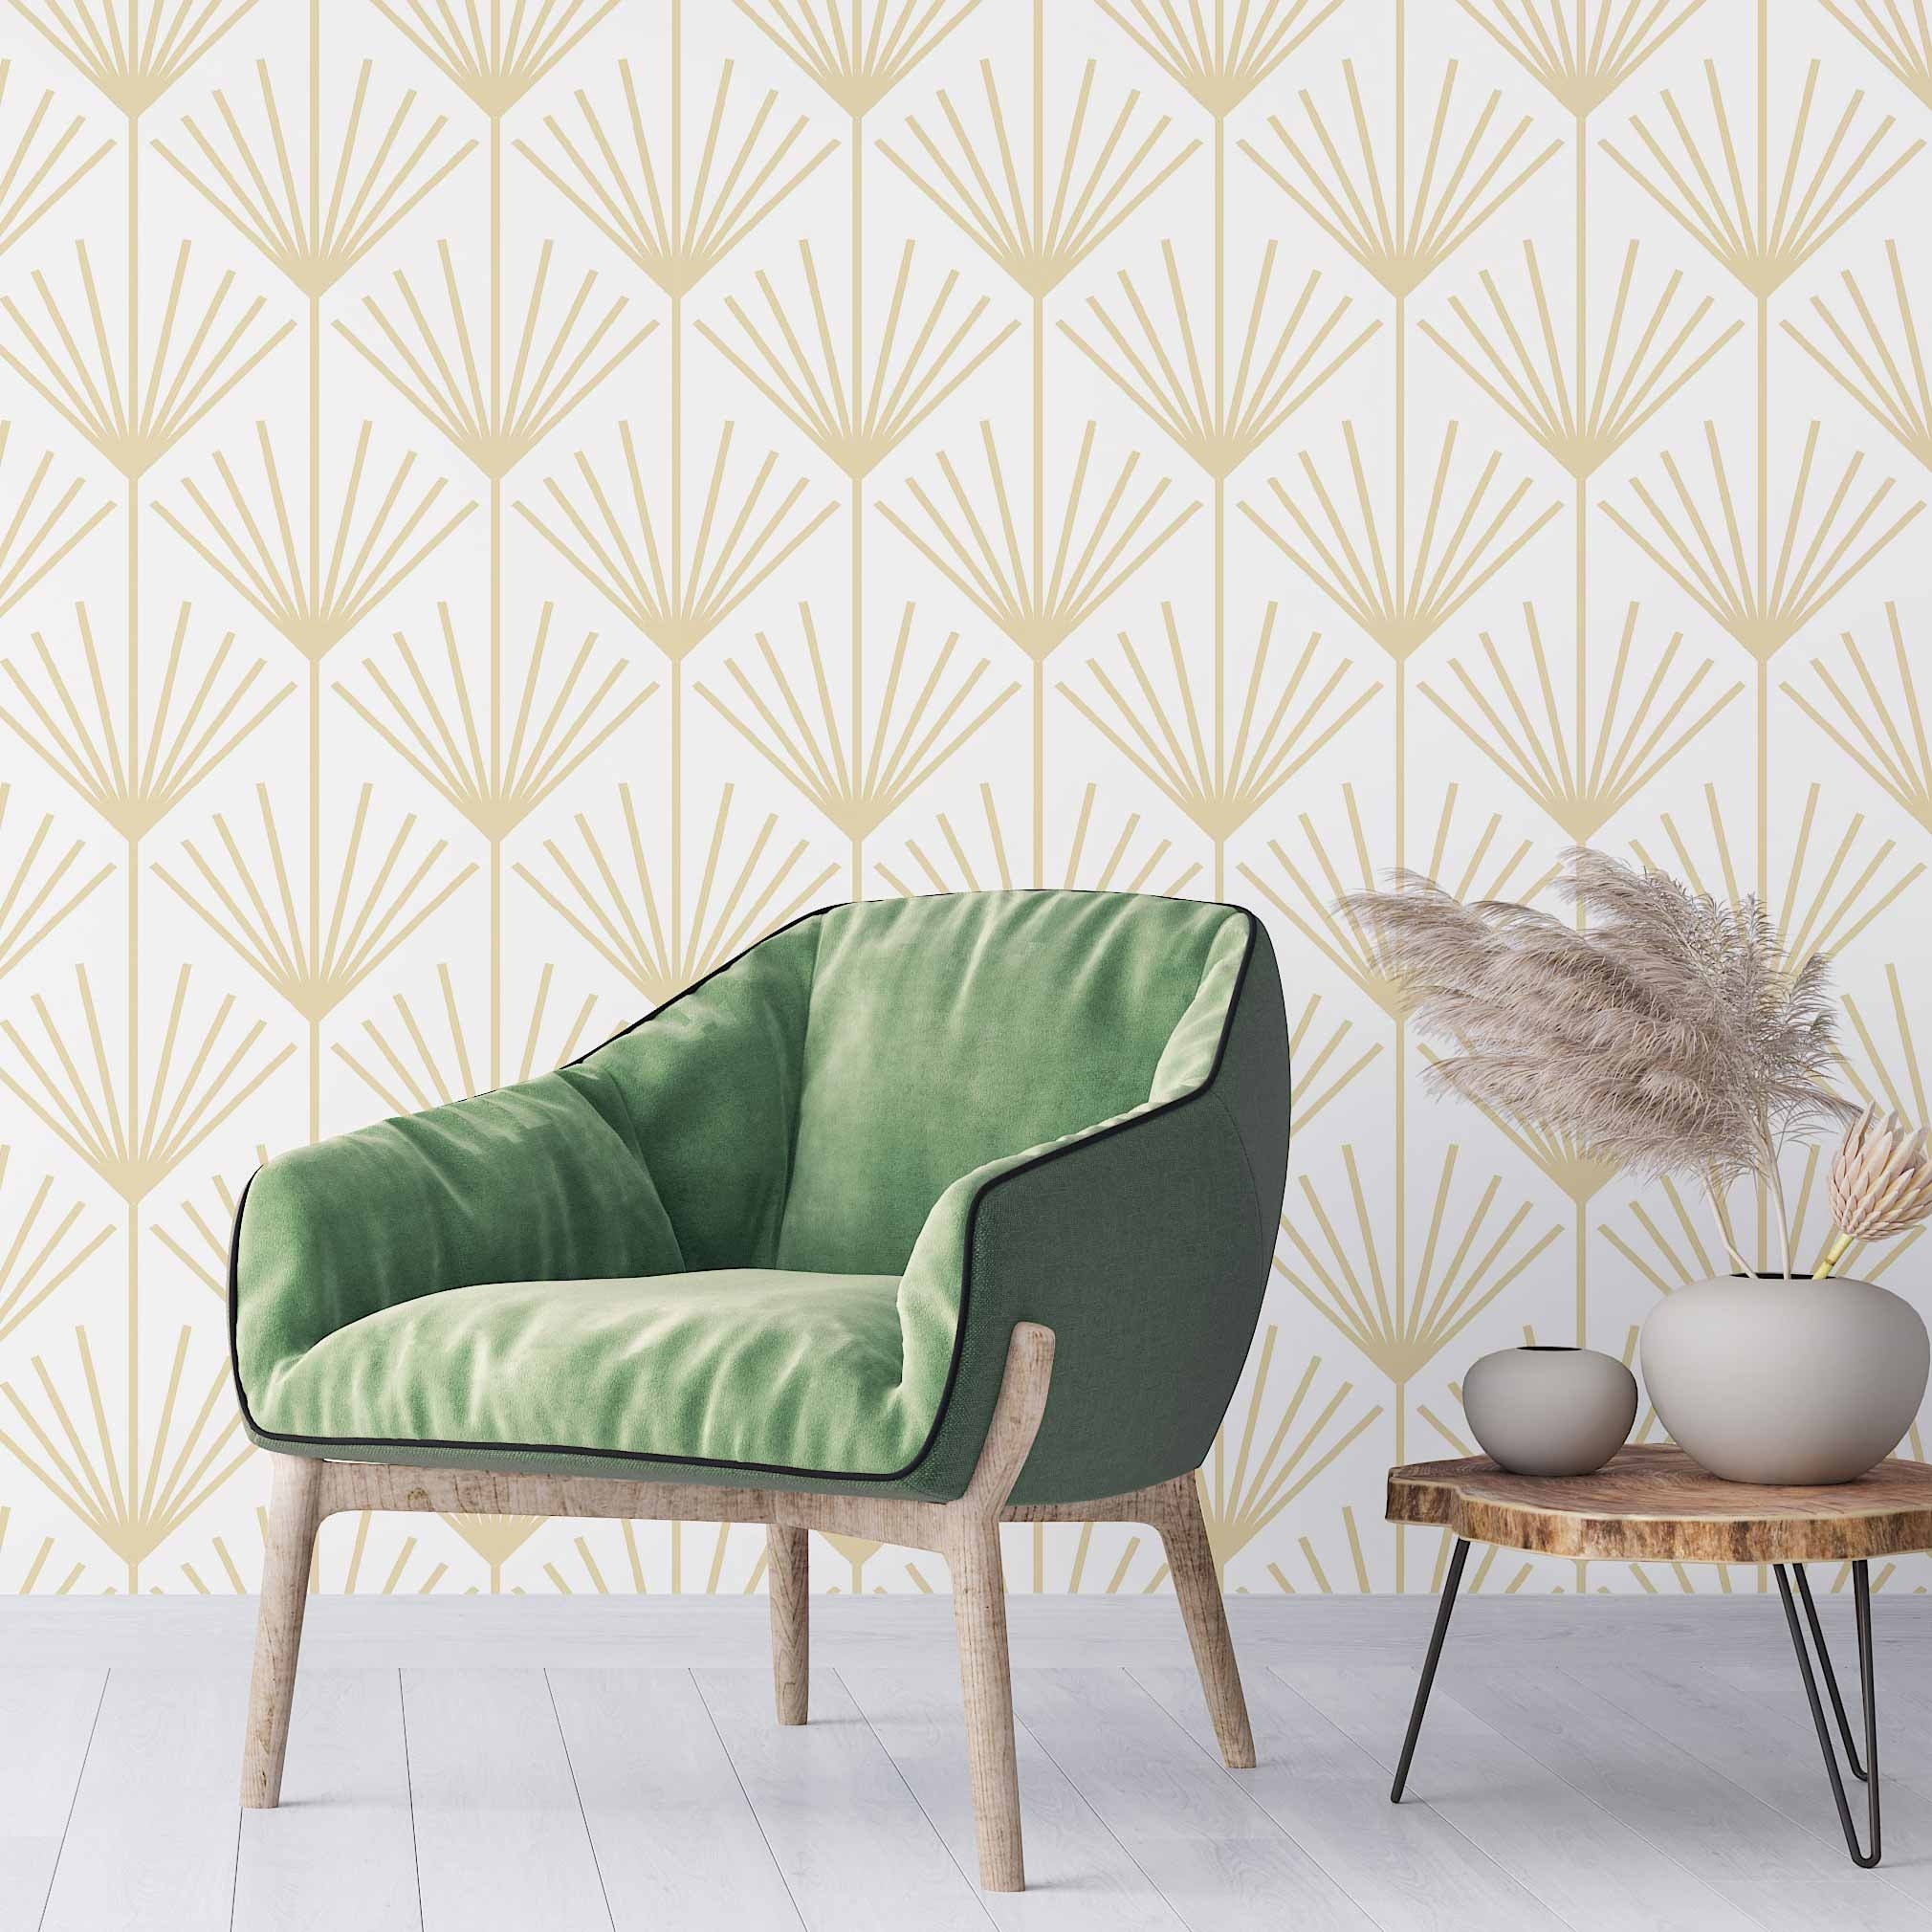 Tropical Palm Leaves Solid Beige Peel and Stick Smooth Vinyl Wallpaper  W9219VinylBeige216  The Home Depot